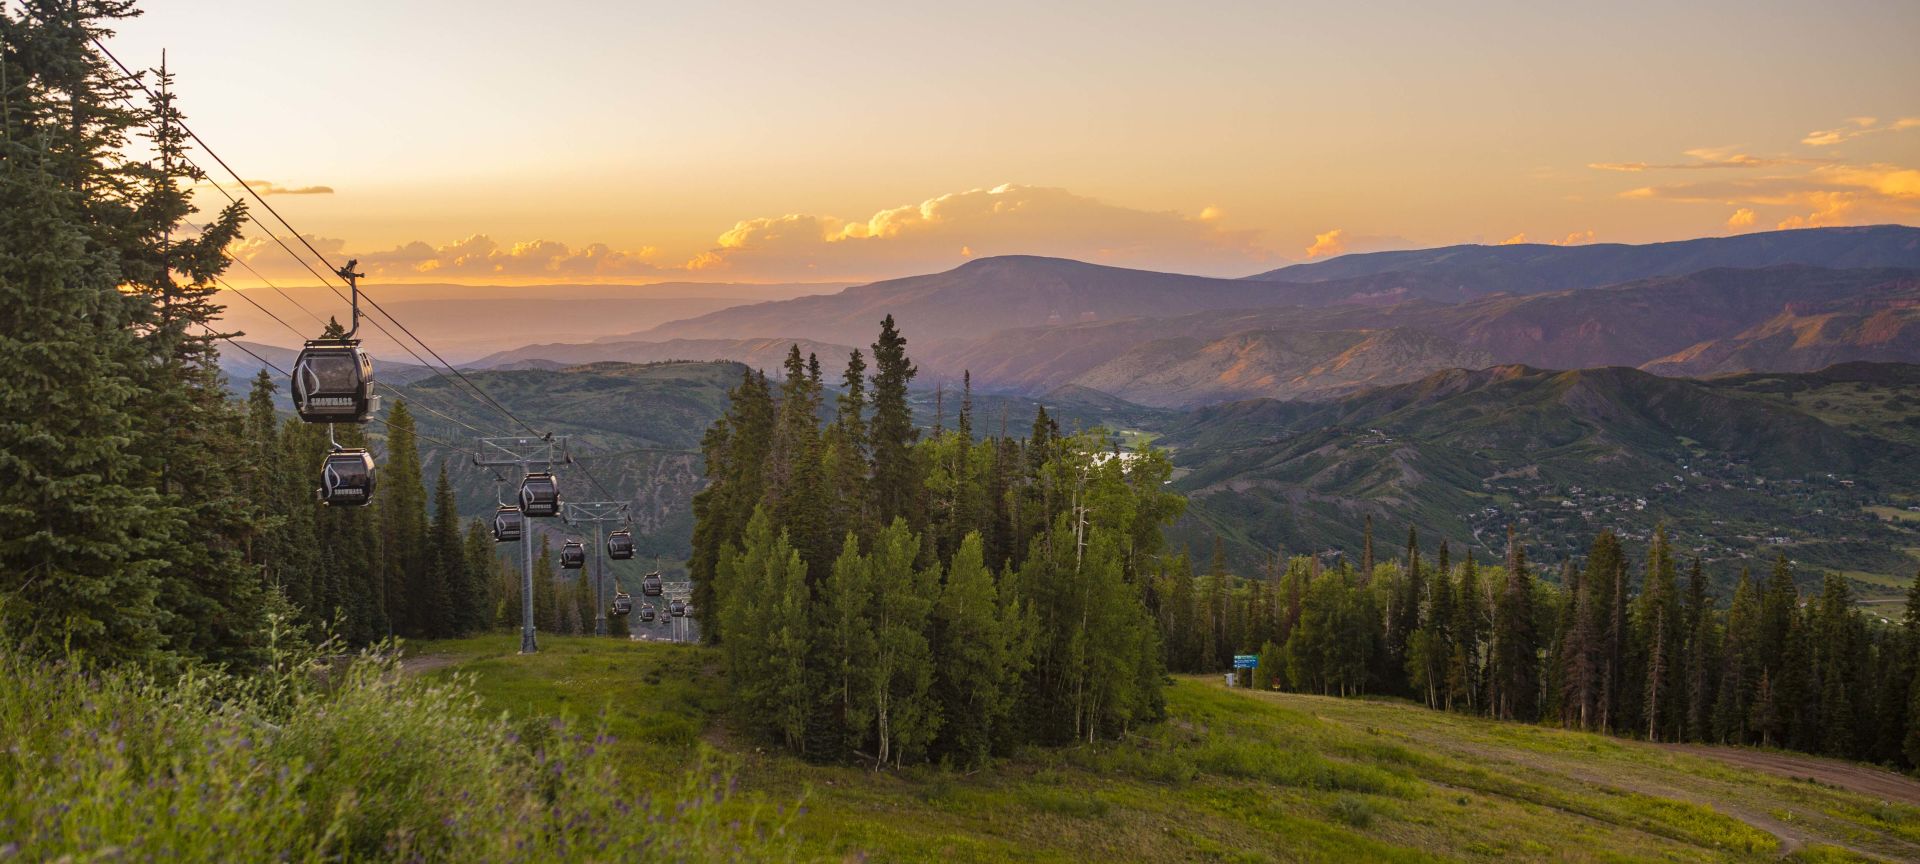 Picturesque view of Snowmass Mountain